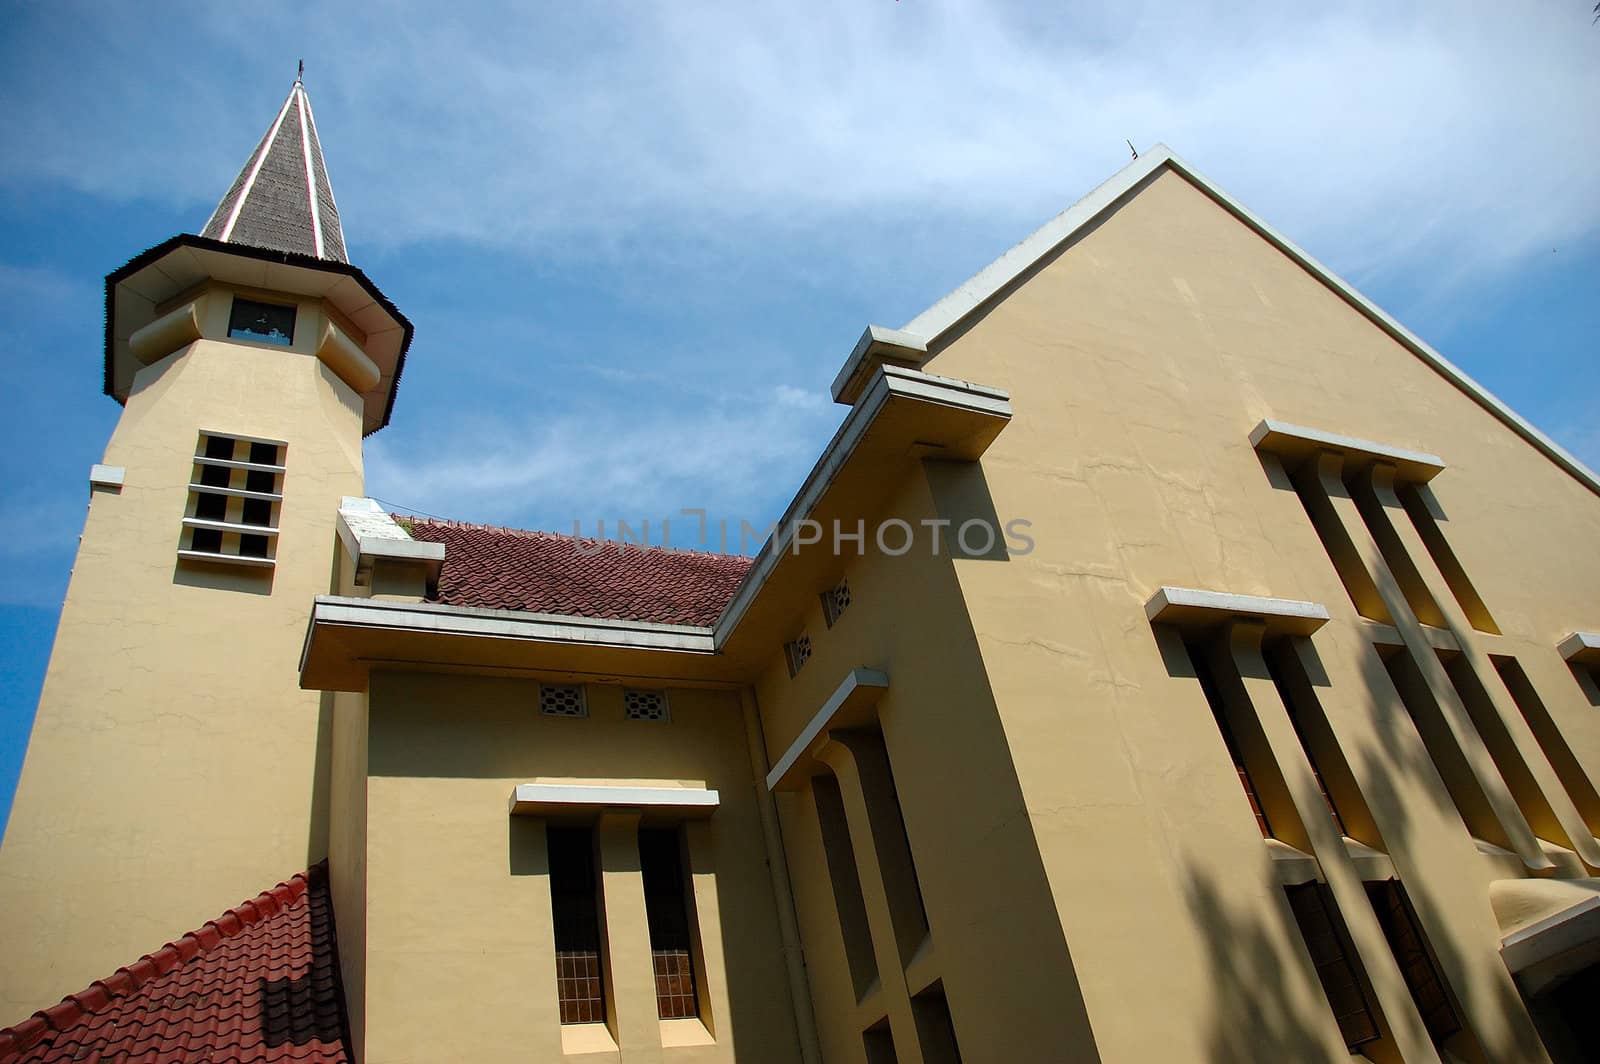 old church building in bandung, west java-indonesia